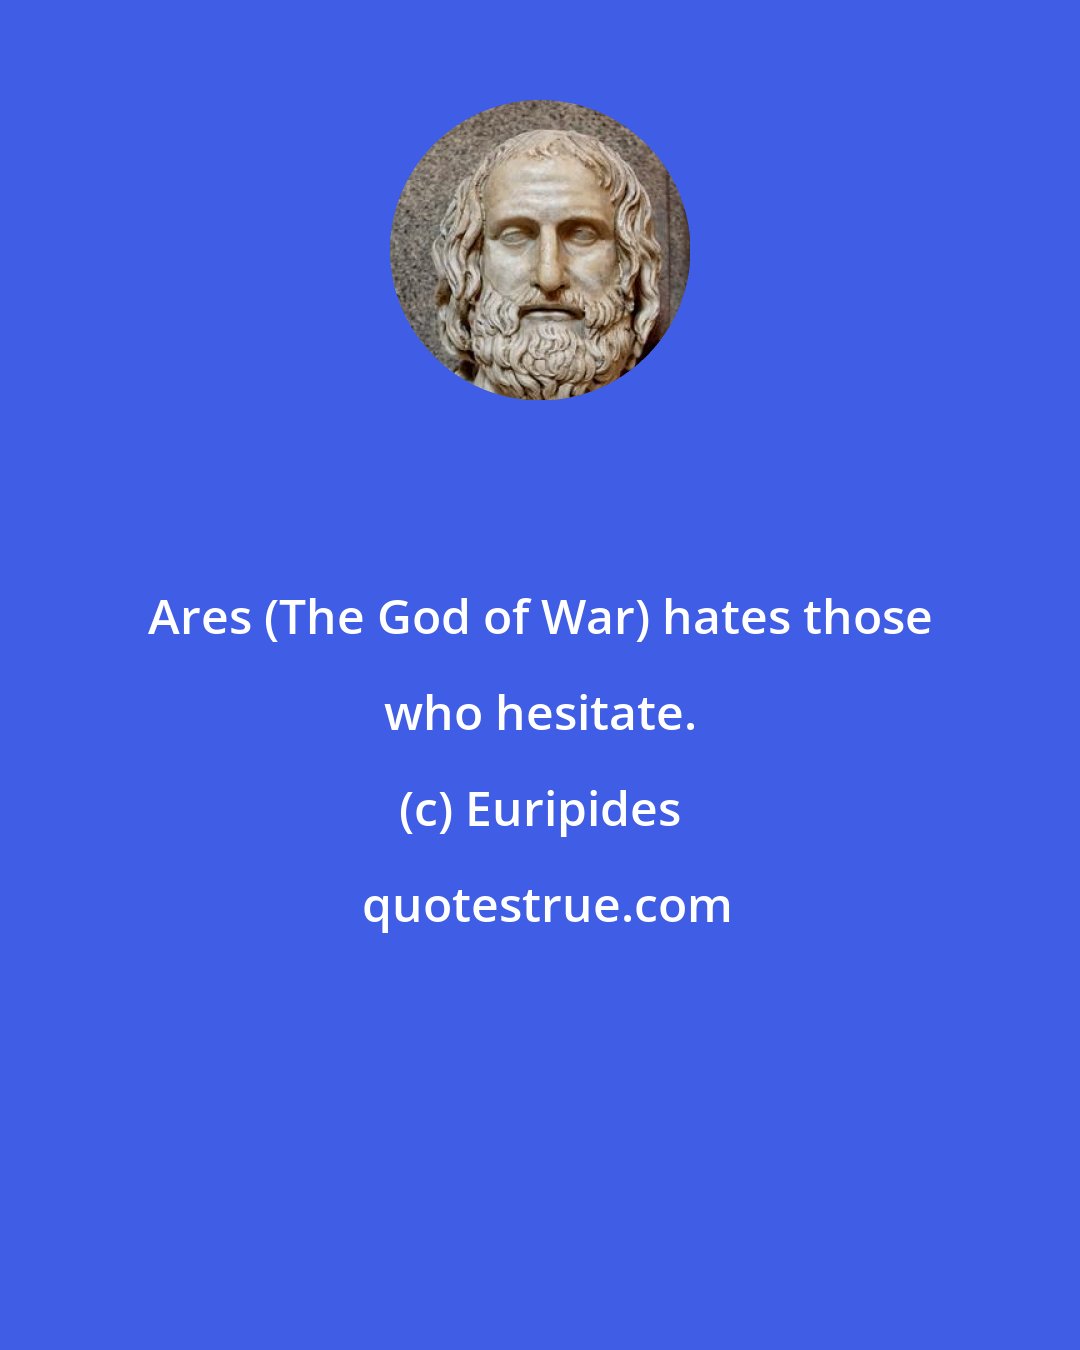 Euripides: Ares (The God of War) hates those who hesitate.